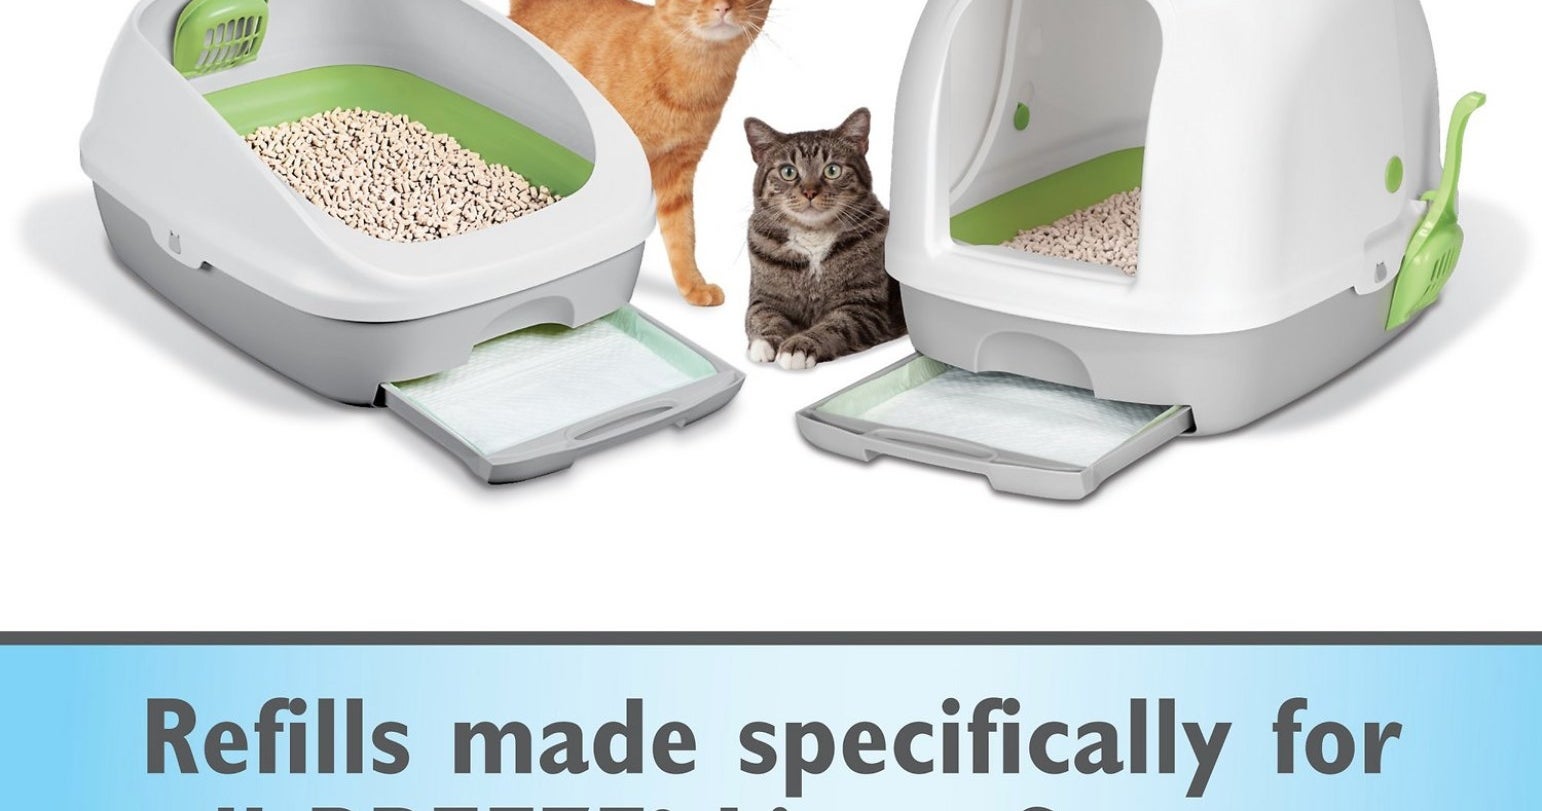 25 Products From Chewy That Cat Owners Love